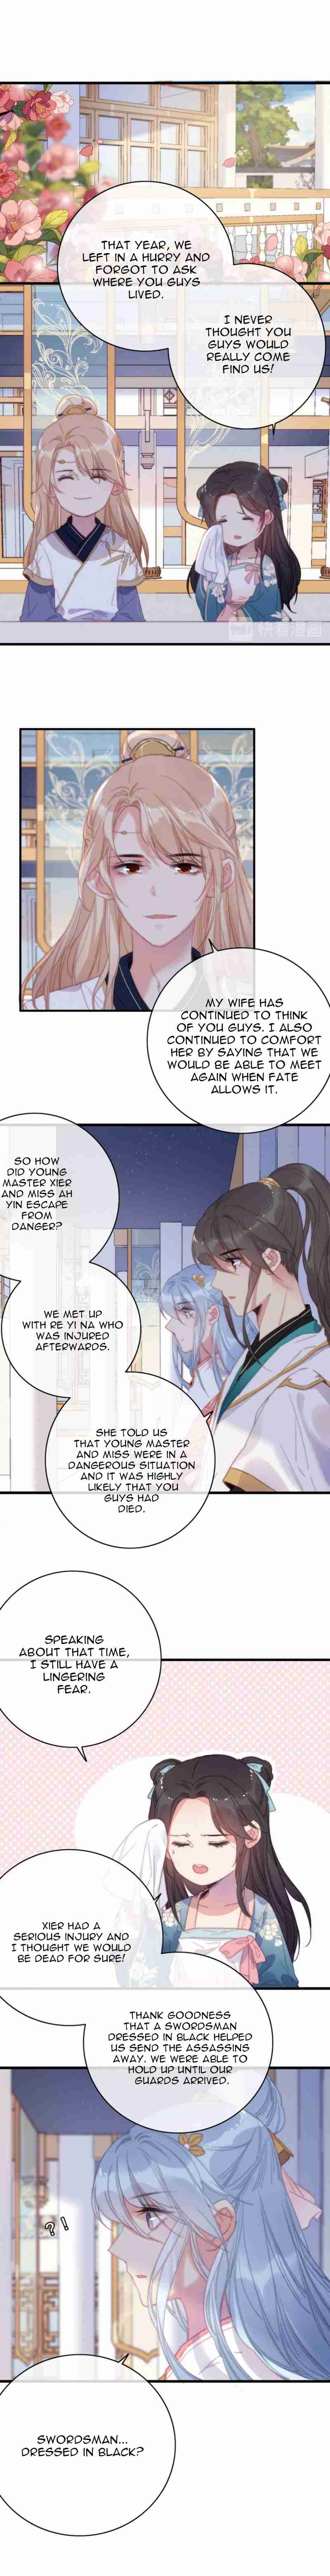 The Love's Oath Ch. 46 Meeting Old Friends Again